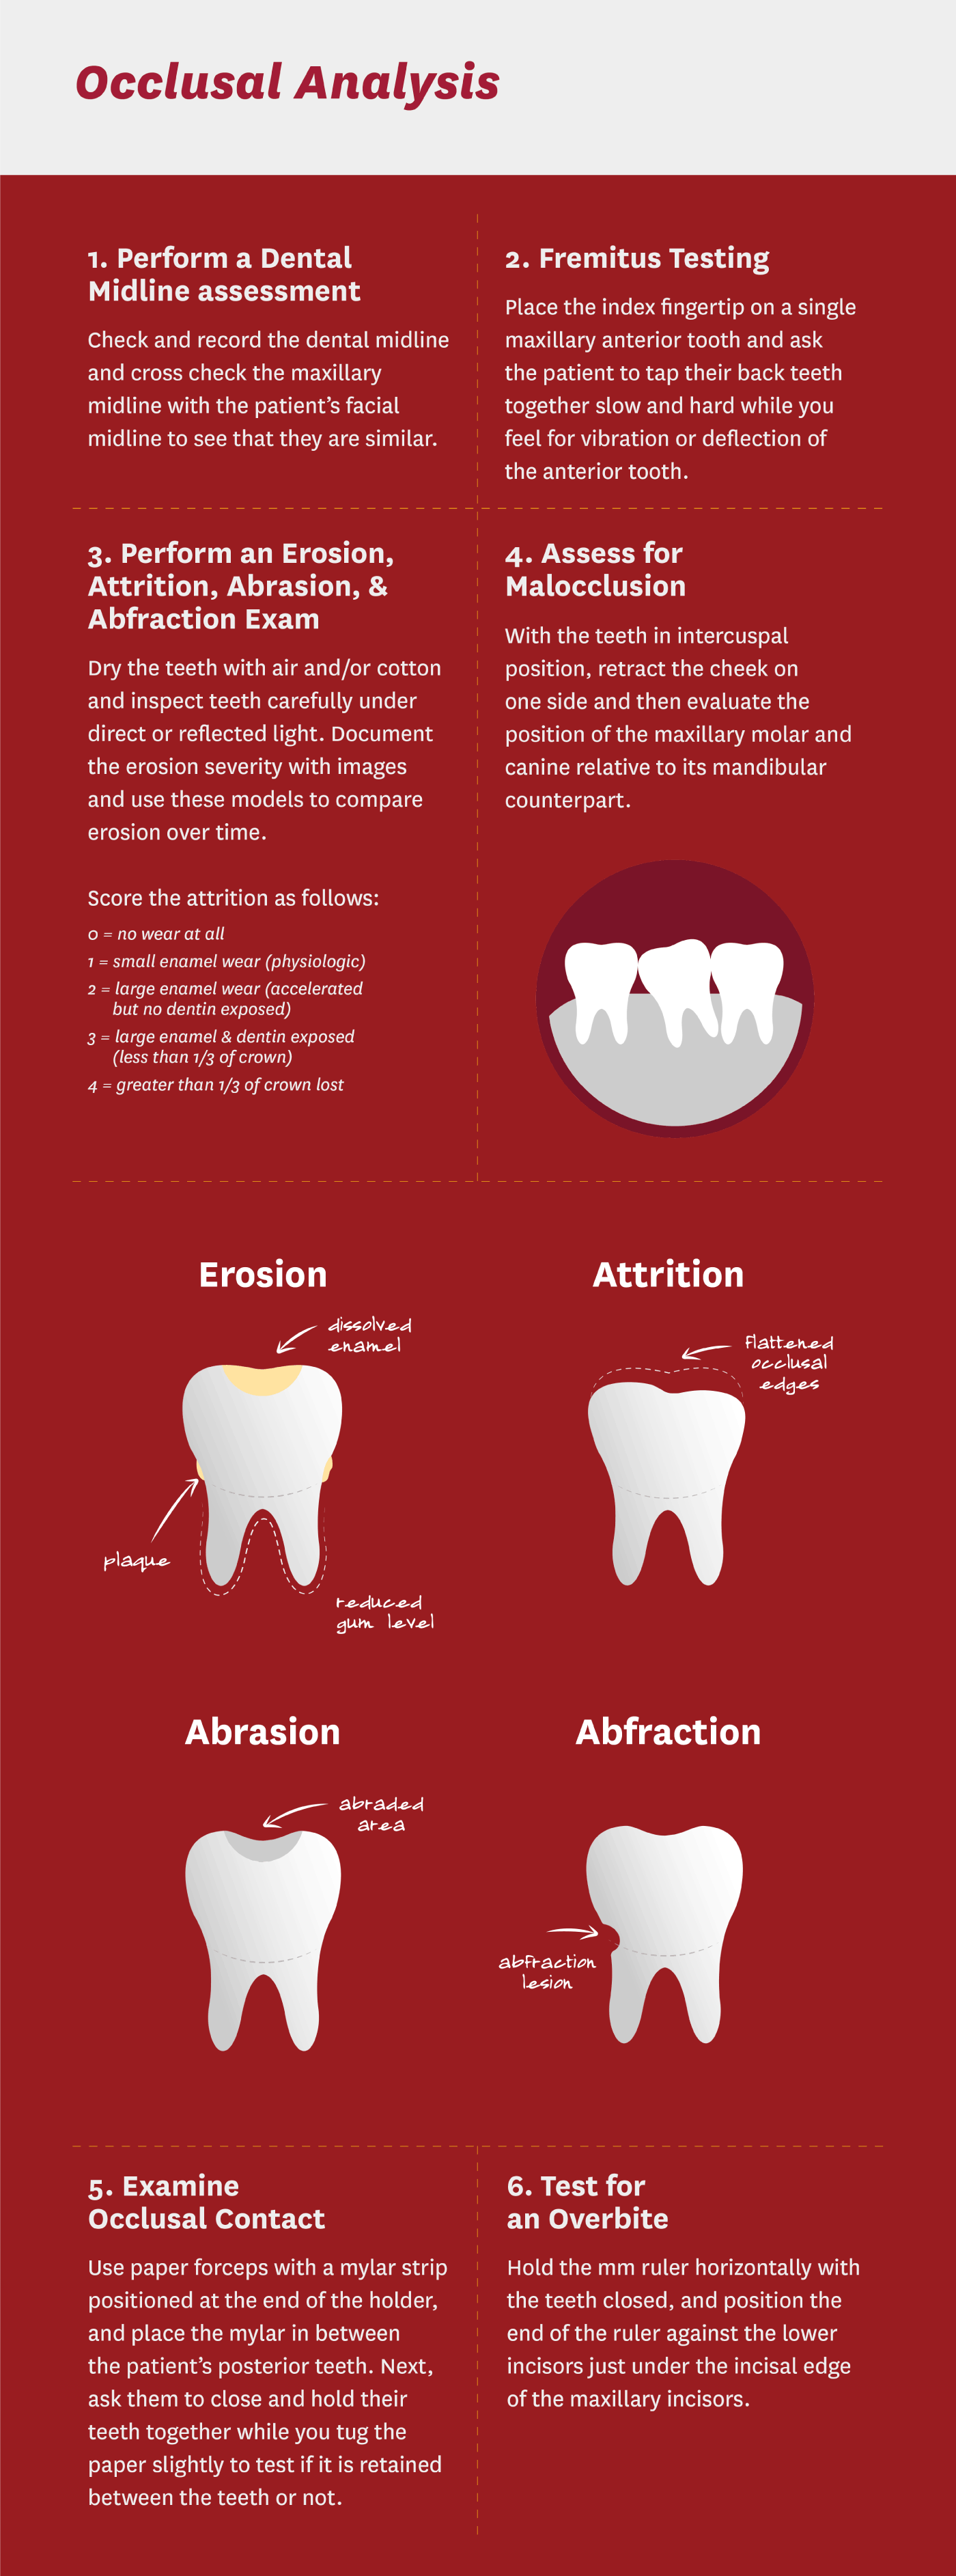 How to Perform an Occlusal Analysis Infographic